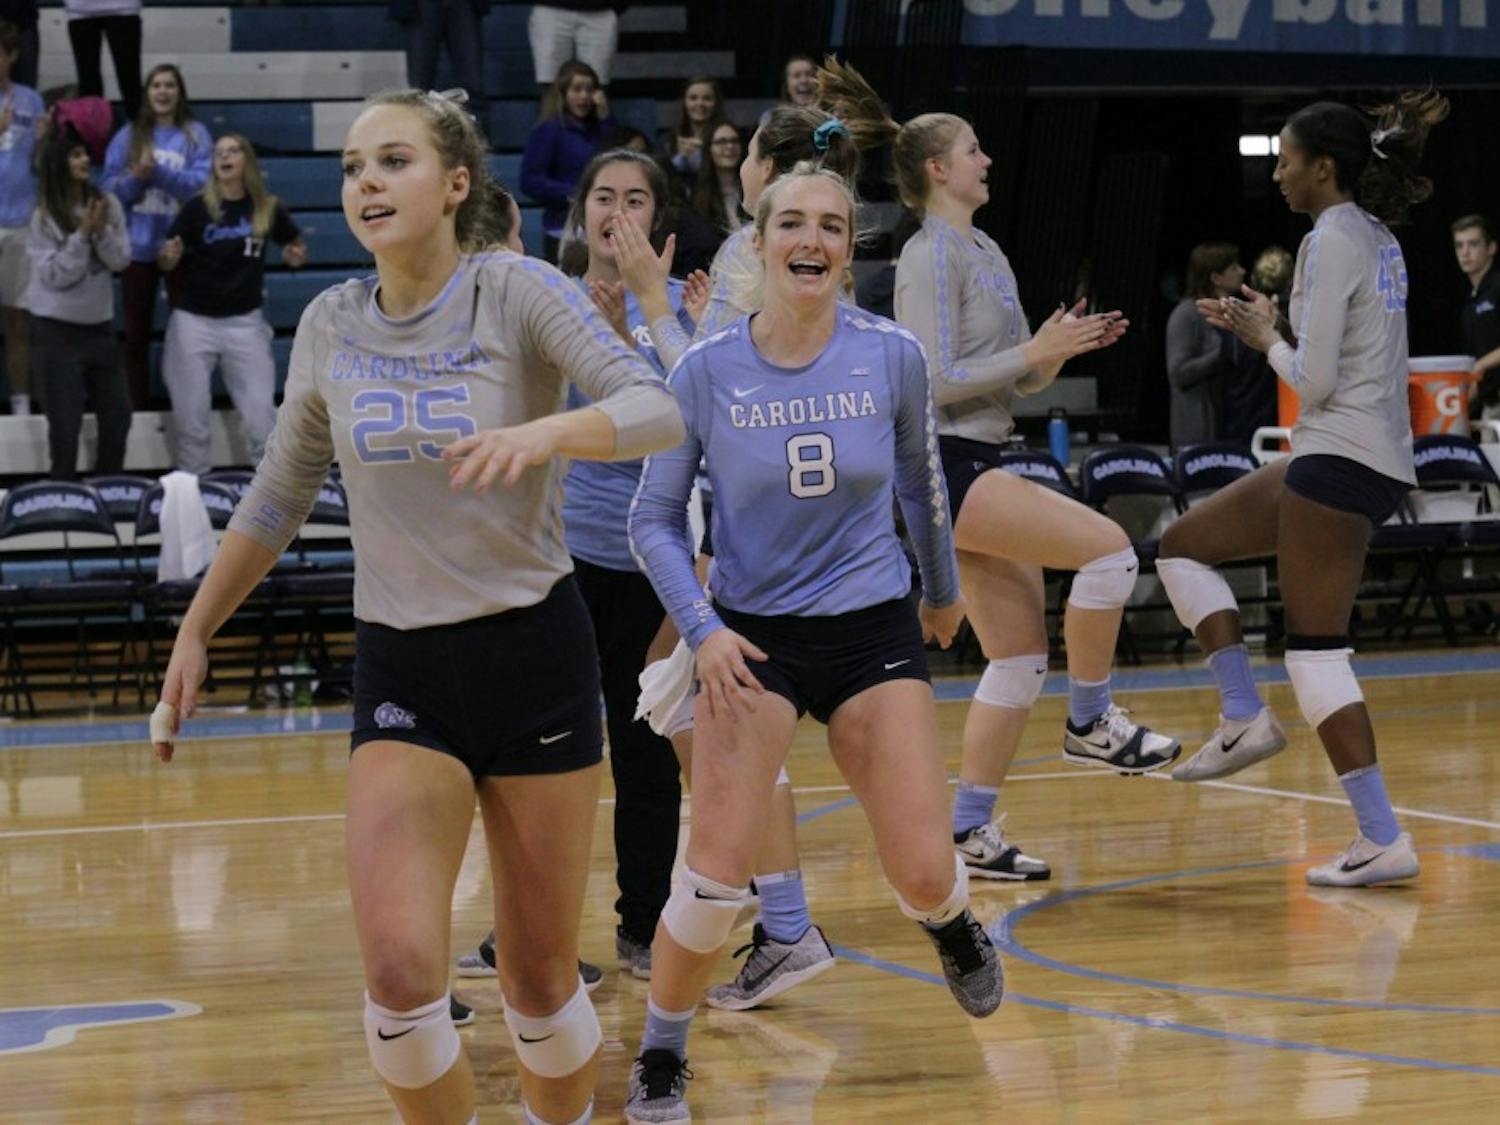 Members of the UNC volleyball team celebrate after their 3-2 win over Georgia Tech on Thursday evening.